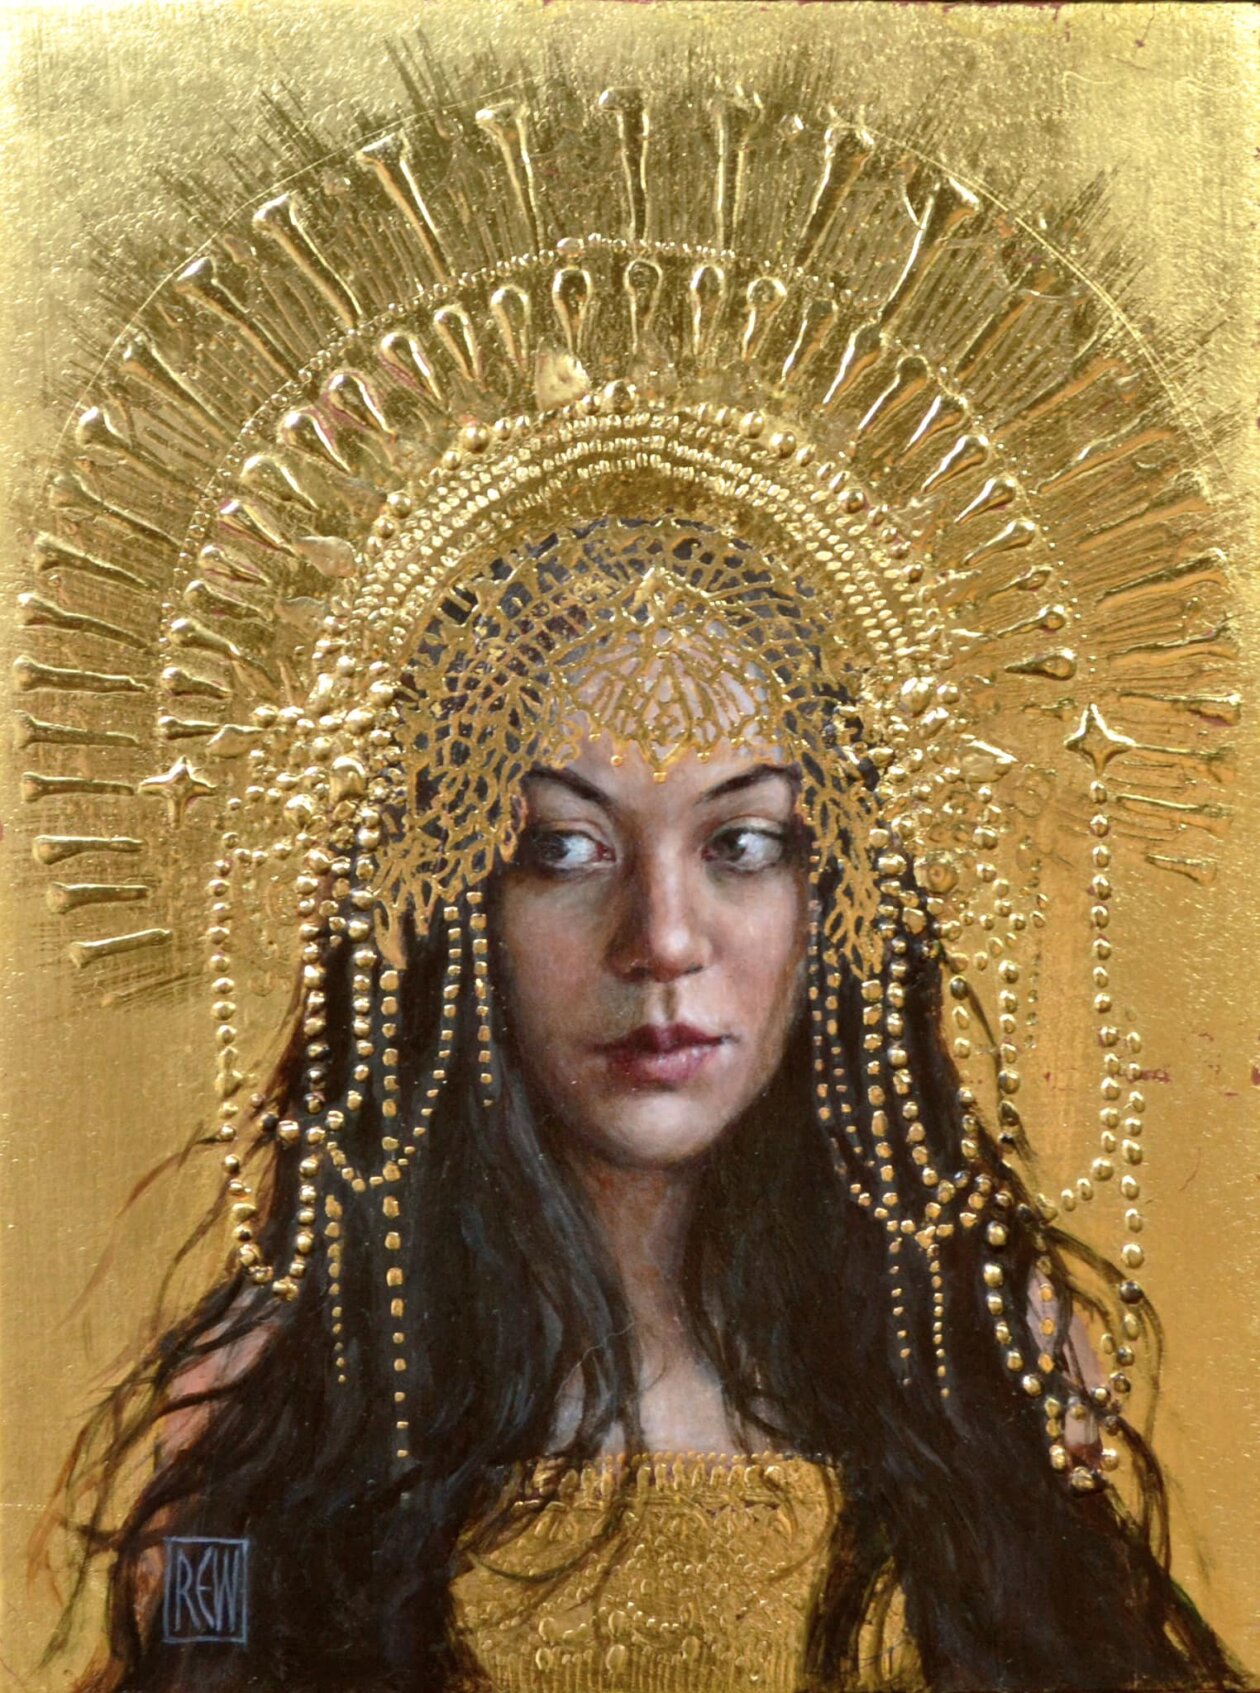 Realistic Figurative Paintings With Gold Ornaments By Stephanie Rew (9)